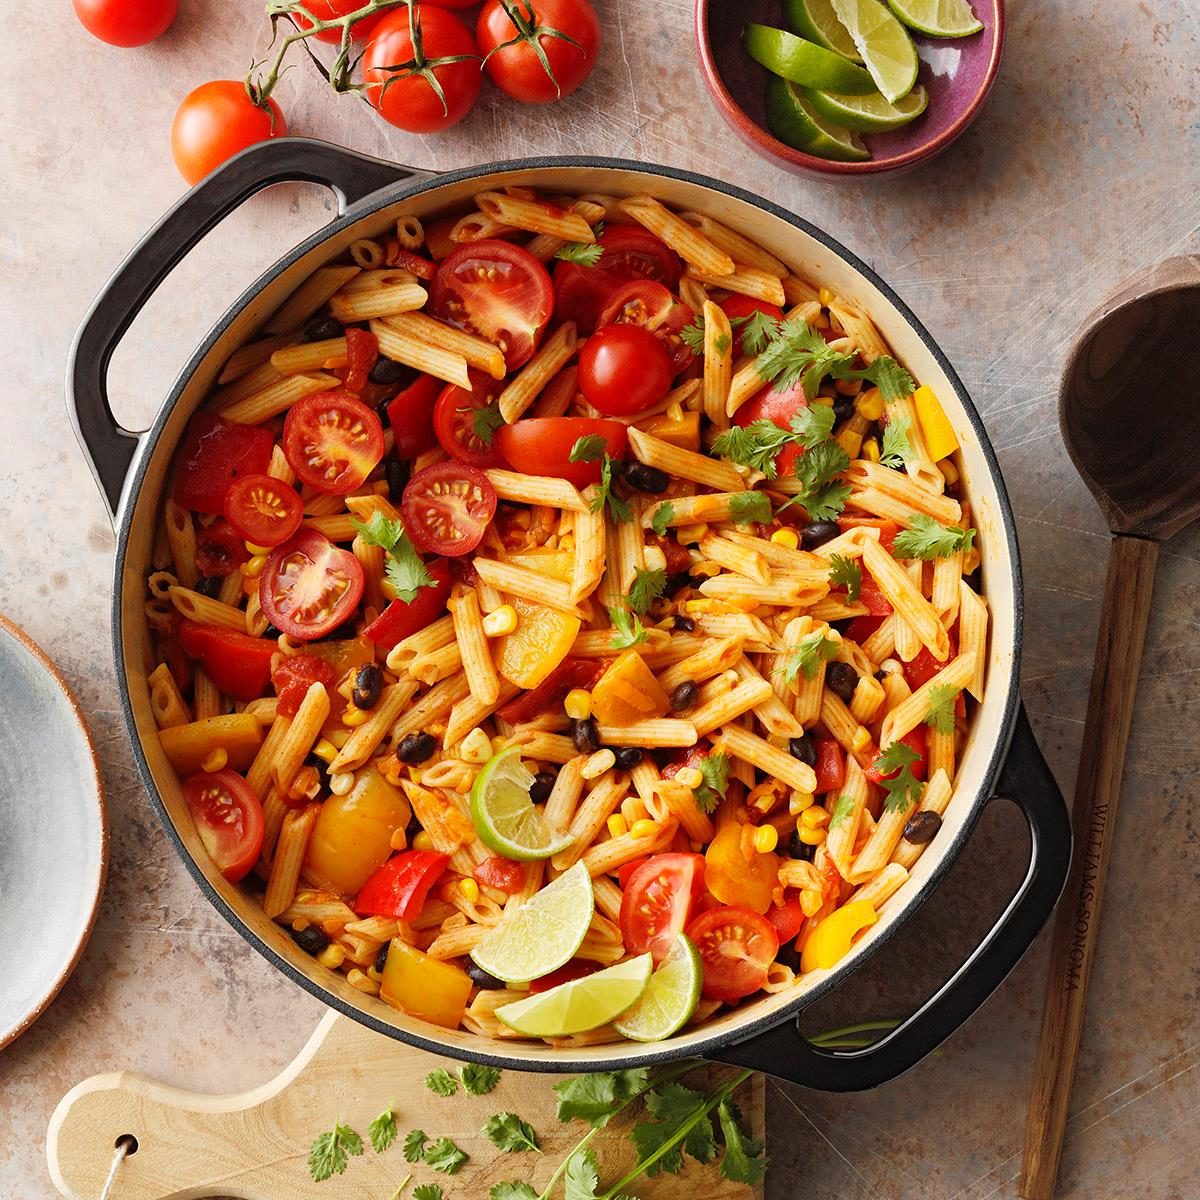 18 Easy One-Pot Meals Ready in Less Than an Hour